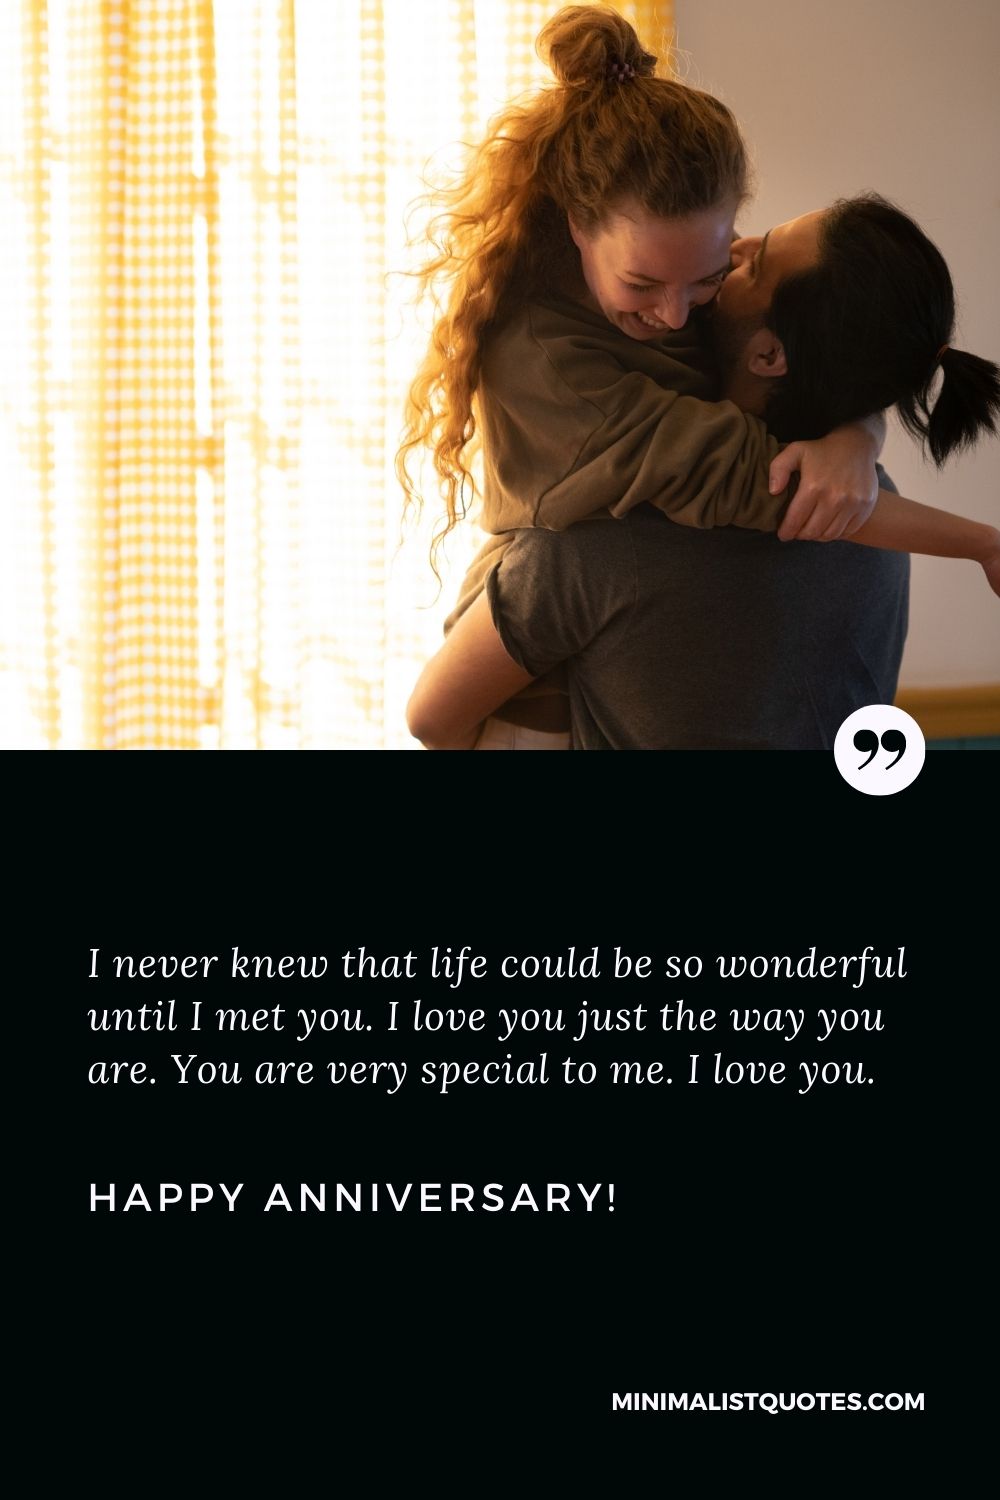 Love anniversary wishes for boyfriend: I never knew that life could be so wonderful until I met you. I love you just the way you are. You are very special to me. I love you. Happy Anniversary!